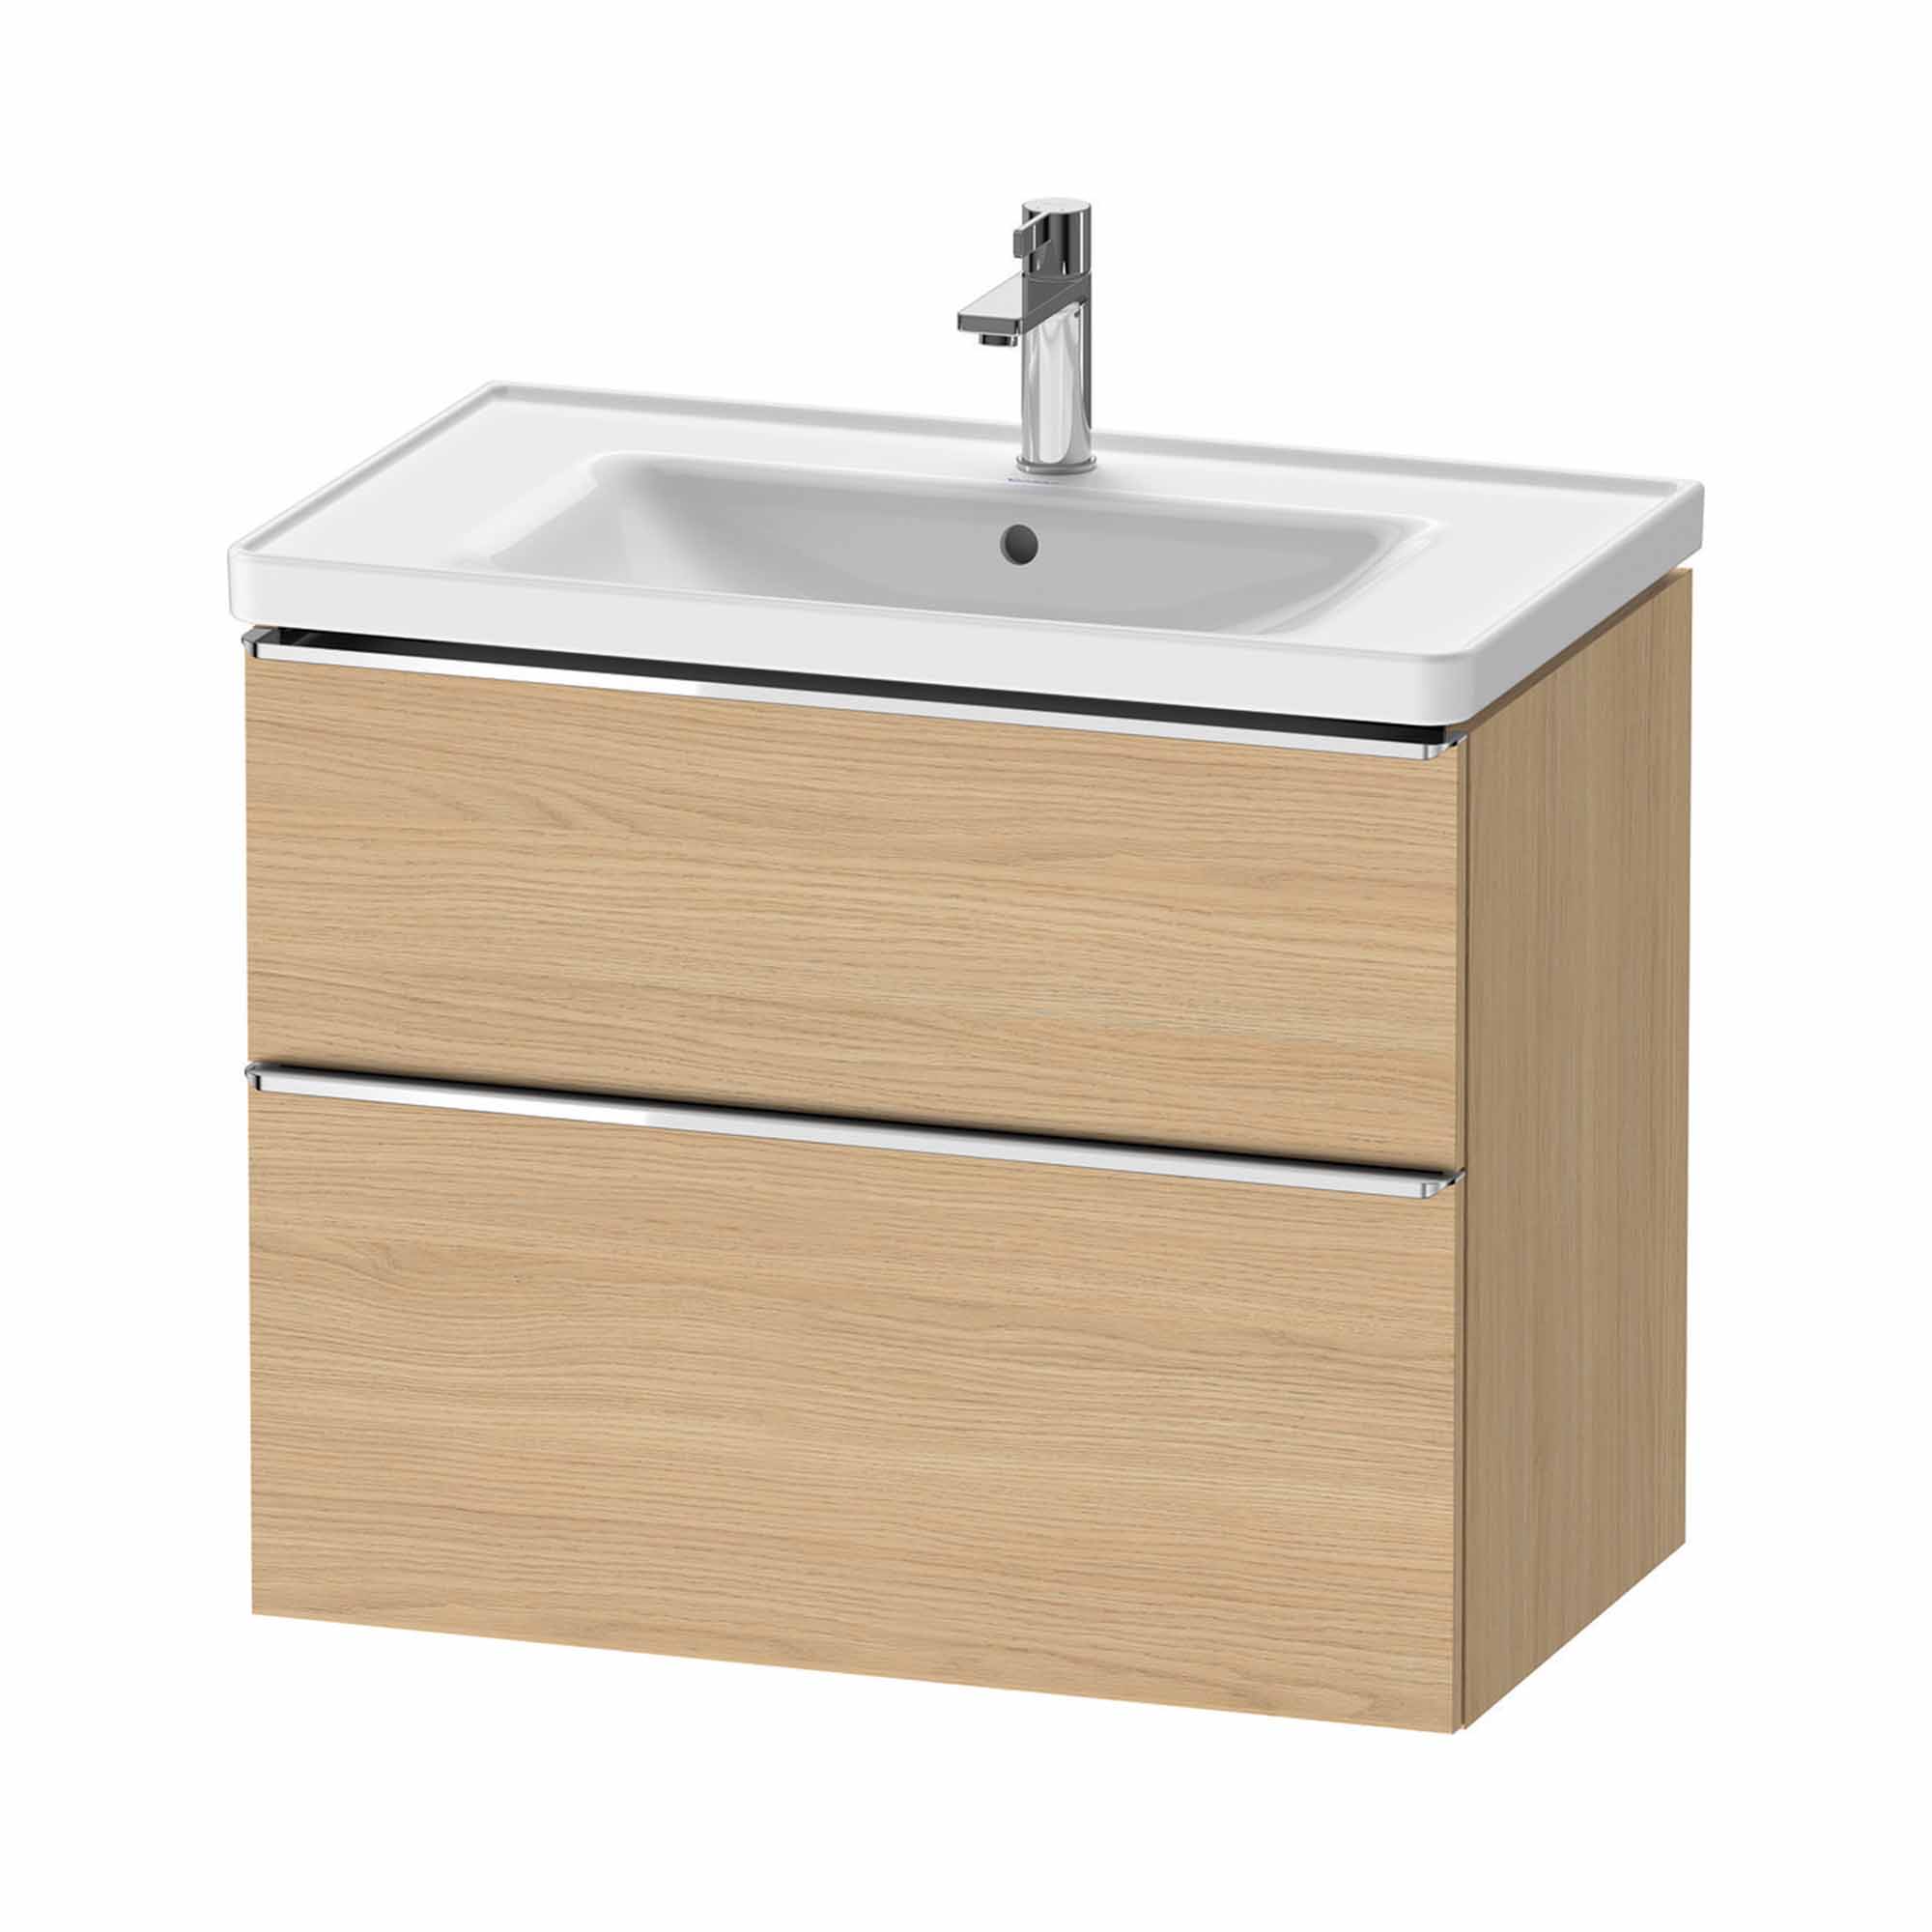 duravit d-neo 800mm wall mounted vanity unit with d-neo basin natural oak chrome handles